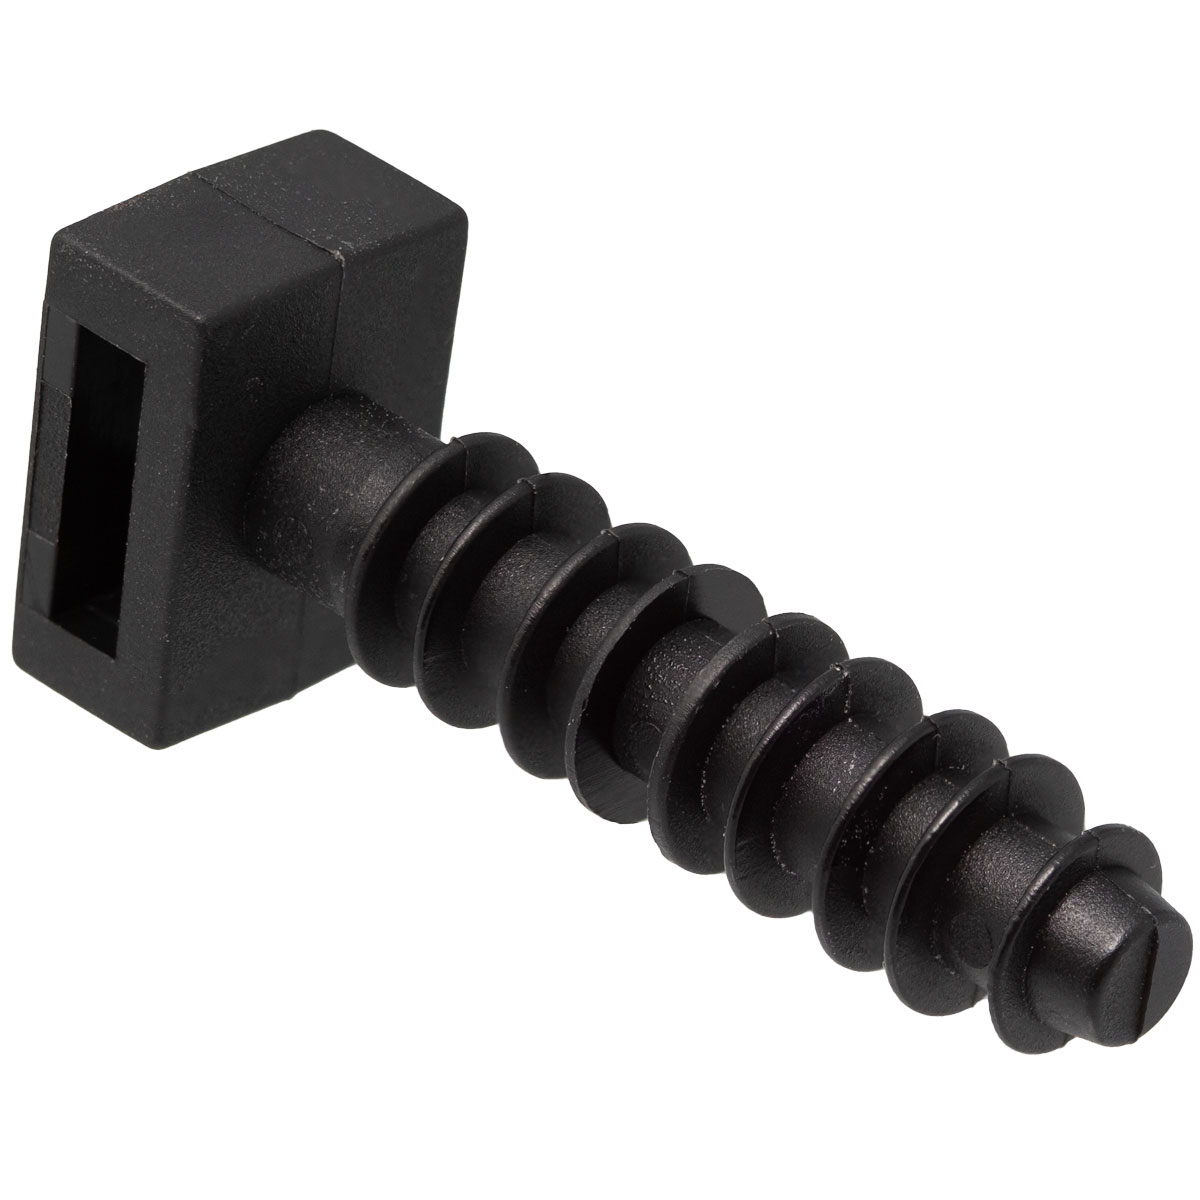 Wall plug for cable ties, 8.1 x 38.1 mm, Black